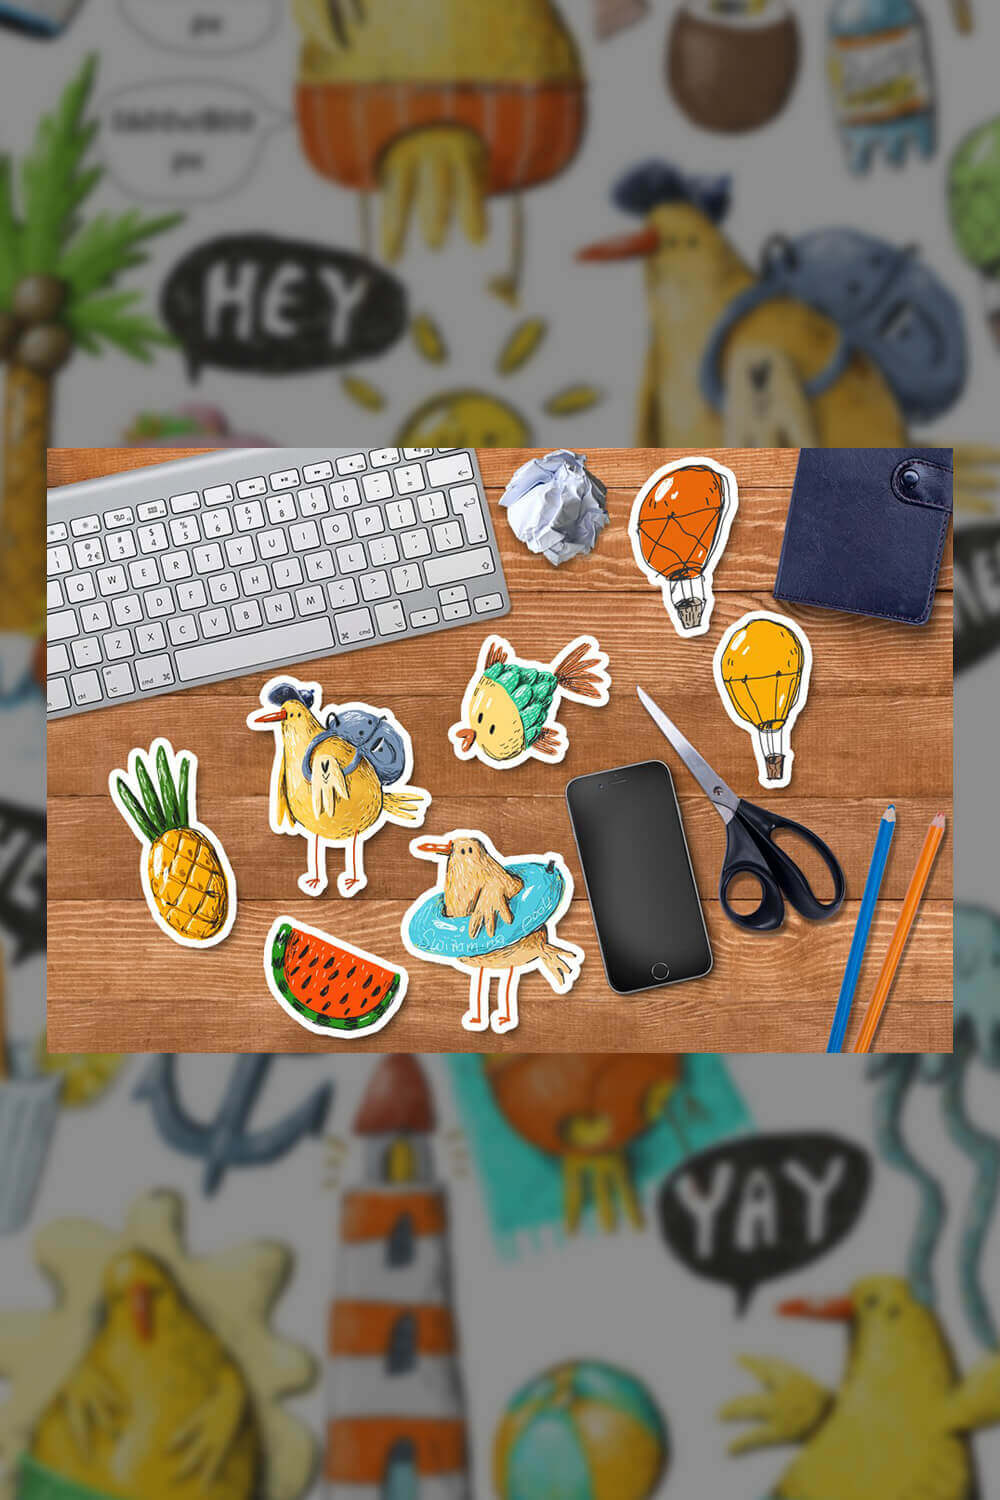 Summer applications with chickens lie next to the keyboard.